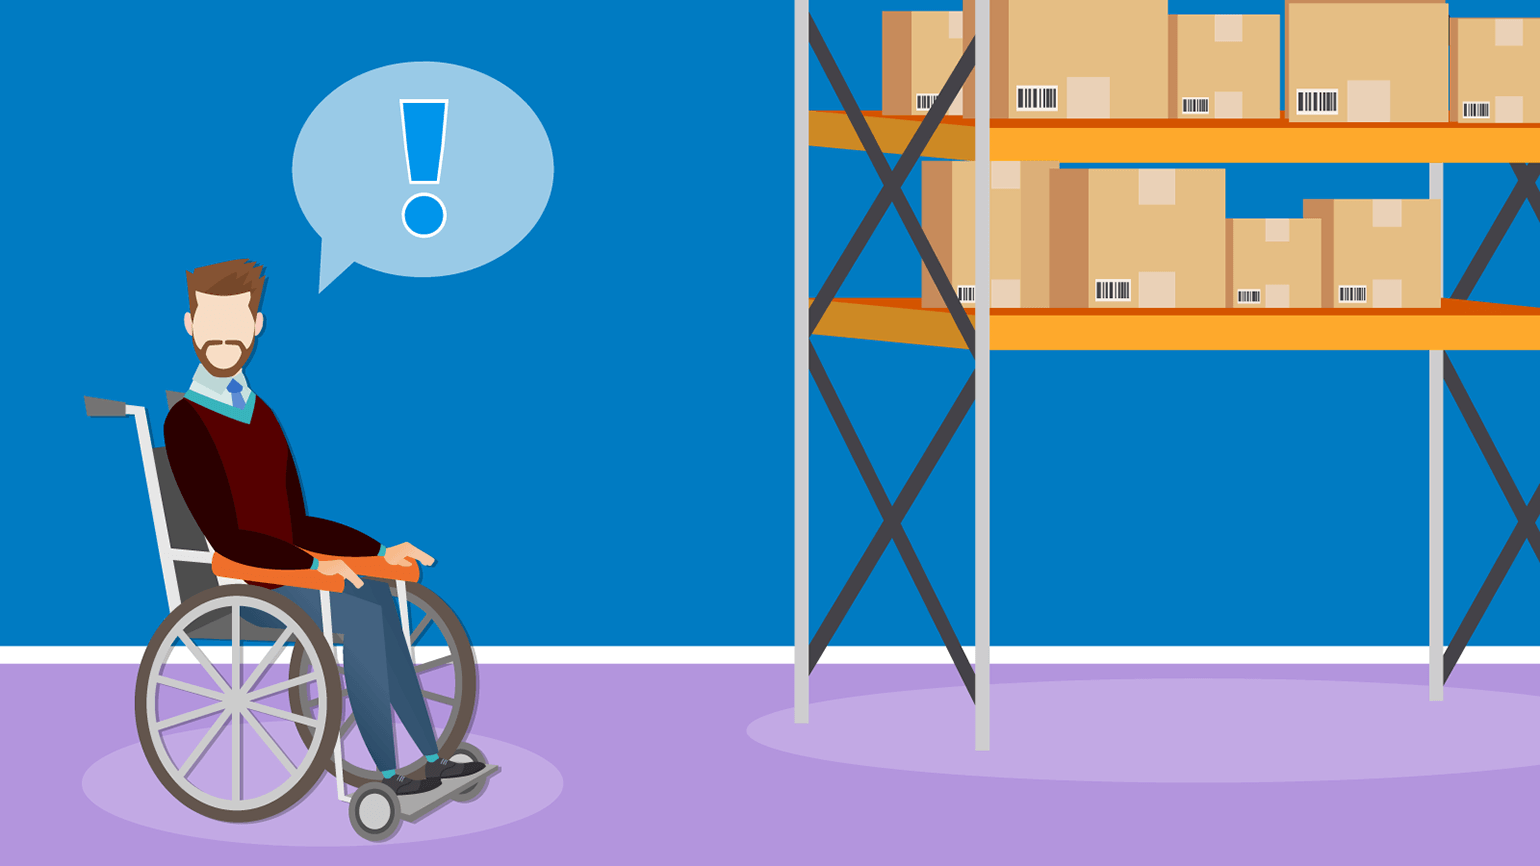 An illustrated image of a person using a wheelchair in a stock room. On the right there is a high shelf with boxes on it. The person has an exclamation mark over their head as if to say, 'Oh no, however will I carry these boxes.'